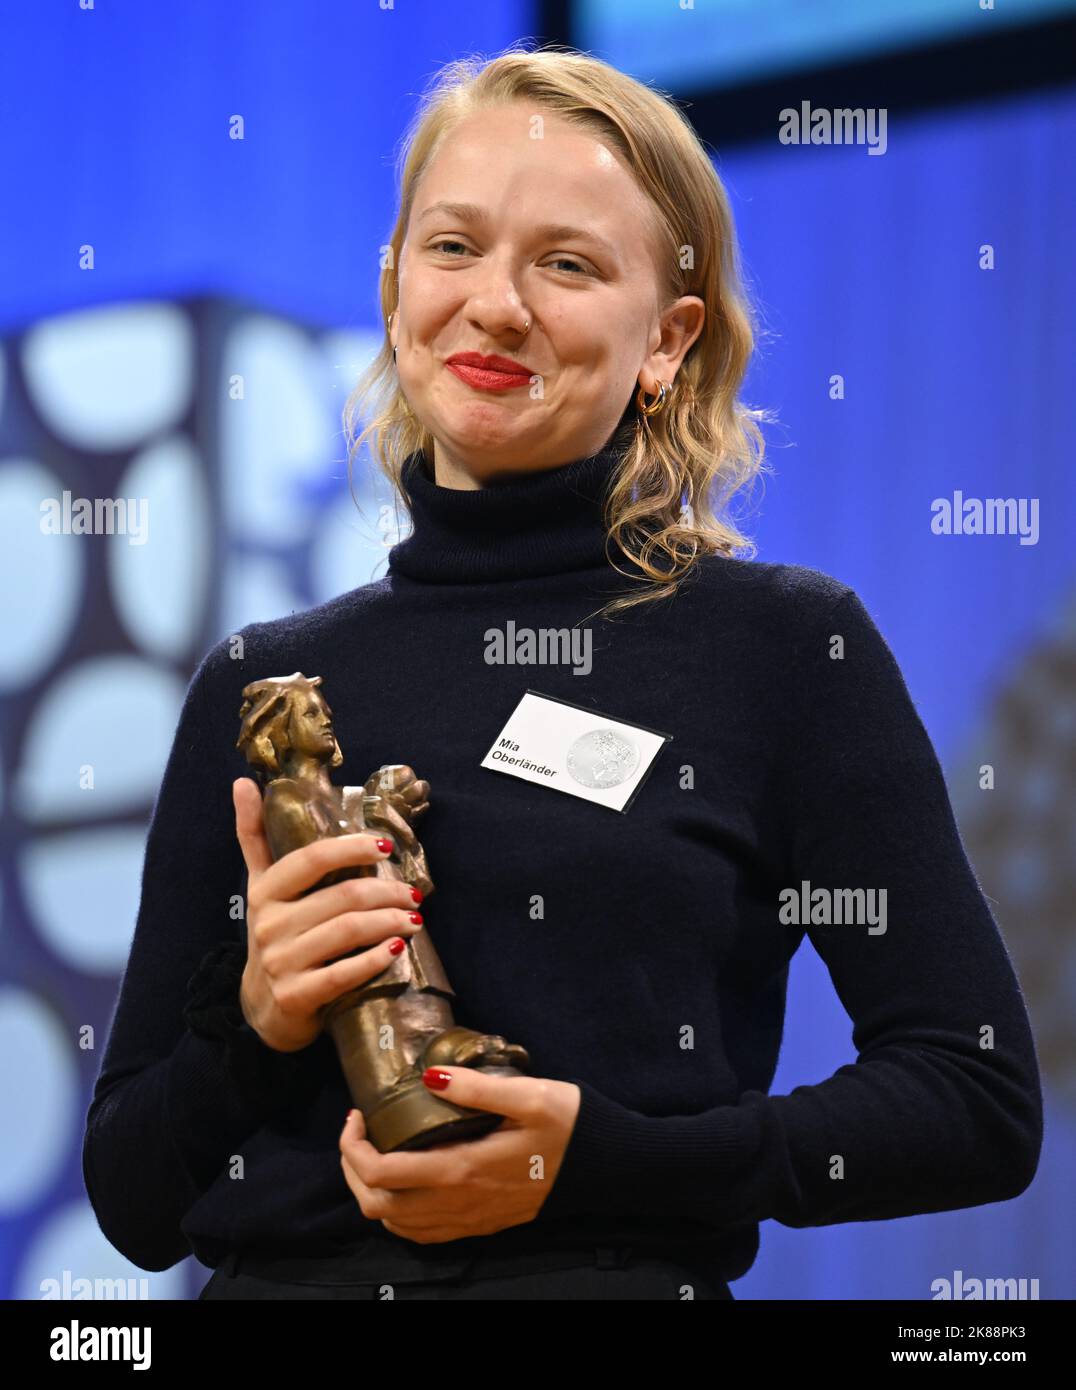 21 October 2022, Hesse, Frankfurt/Main: Illustrator Mia Oberländer is awarded the Momo trophy at the German Youth Literature Prize ceremony at the Congress Center. She receives the special prize 'New Talent Illustration' for her comic 'Anna' (Edition Moderne). Photo: Arne Dedert/dpa Stock Photo